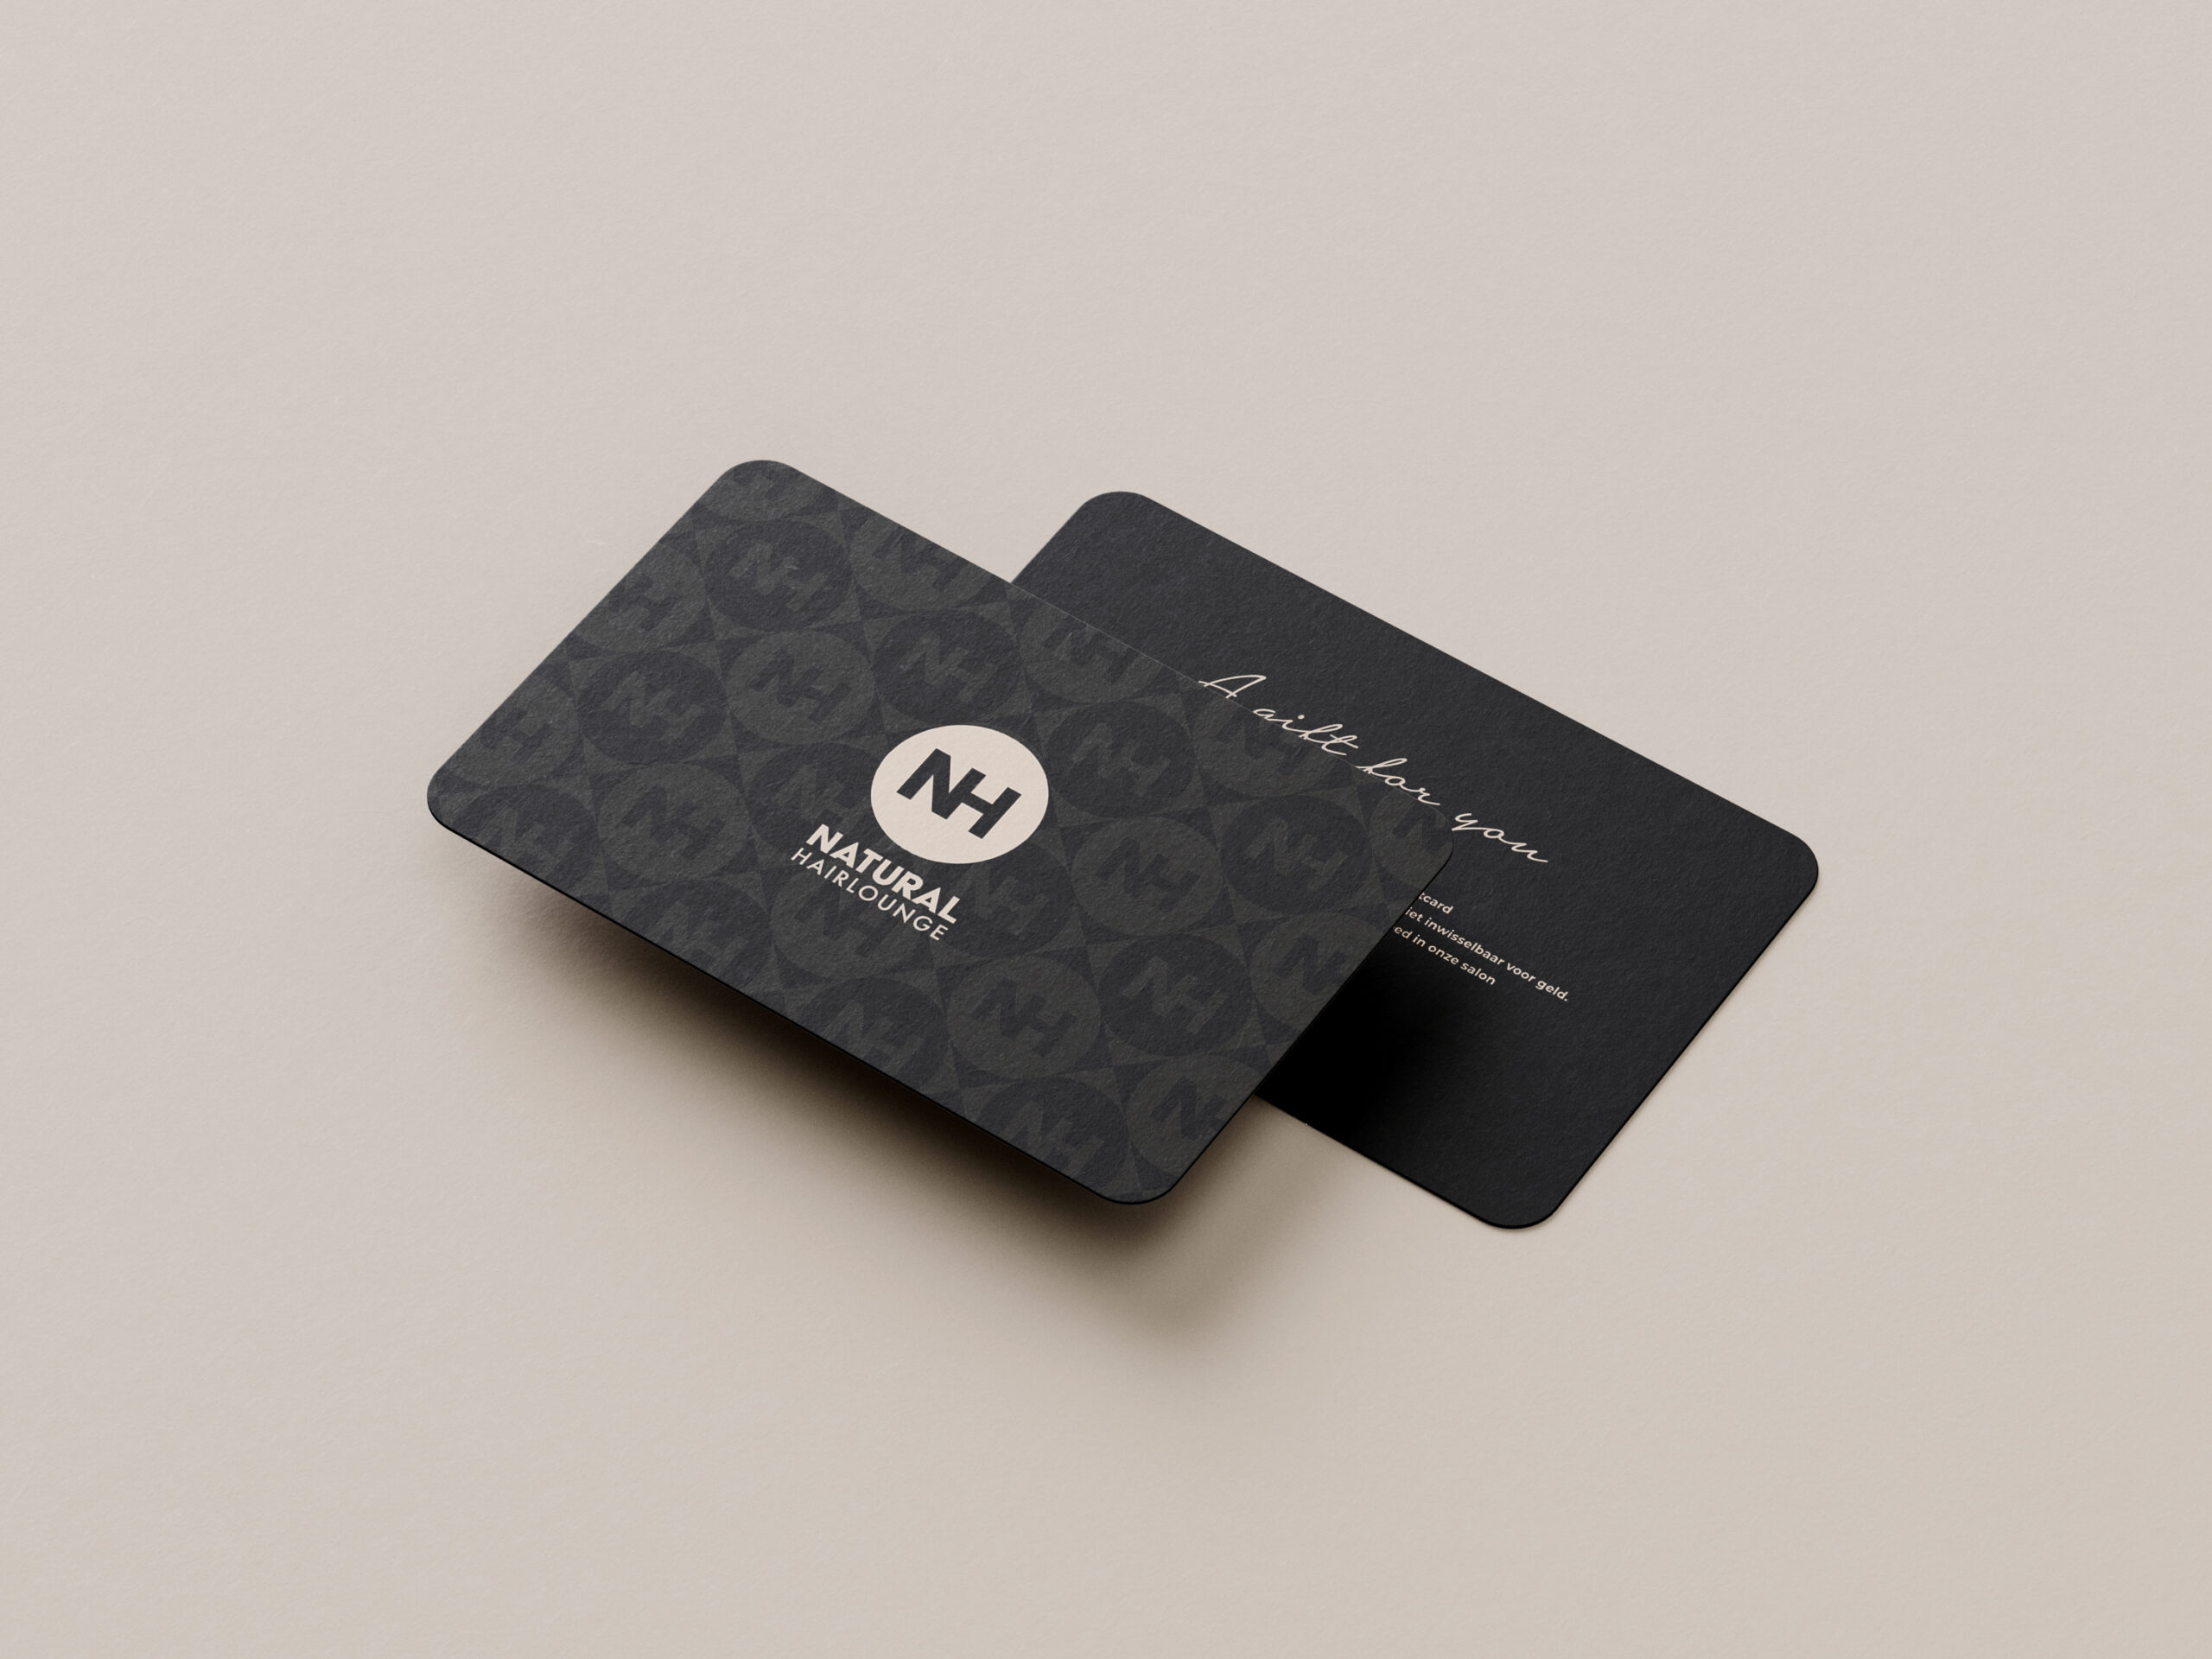 Giftcard Natural Hairlounge